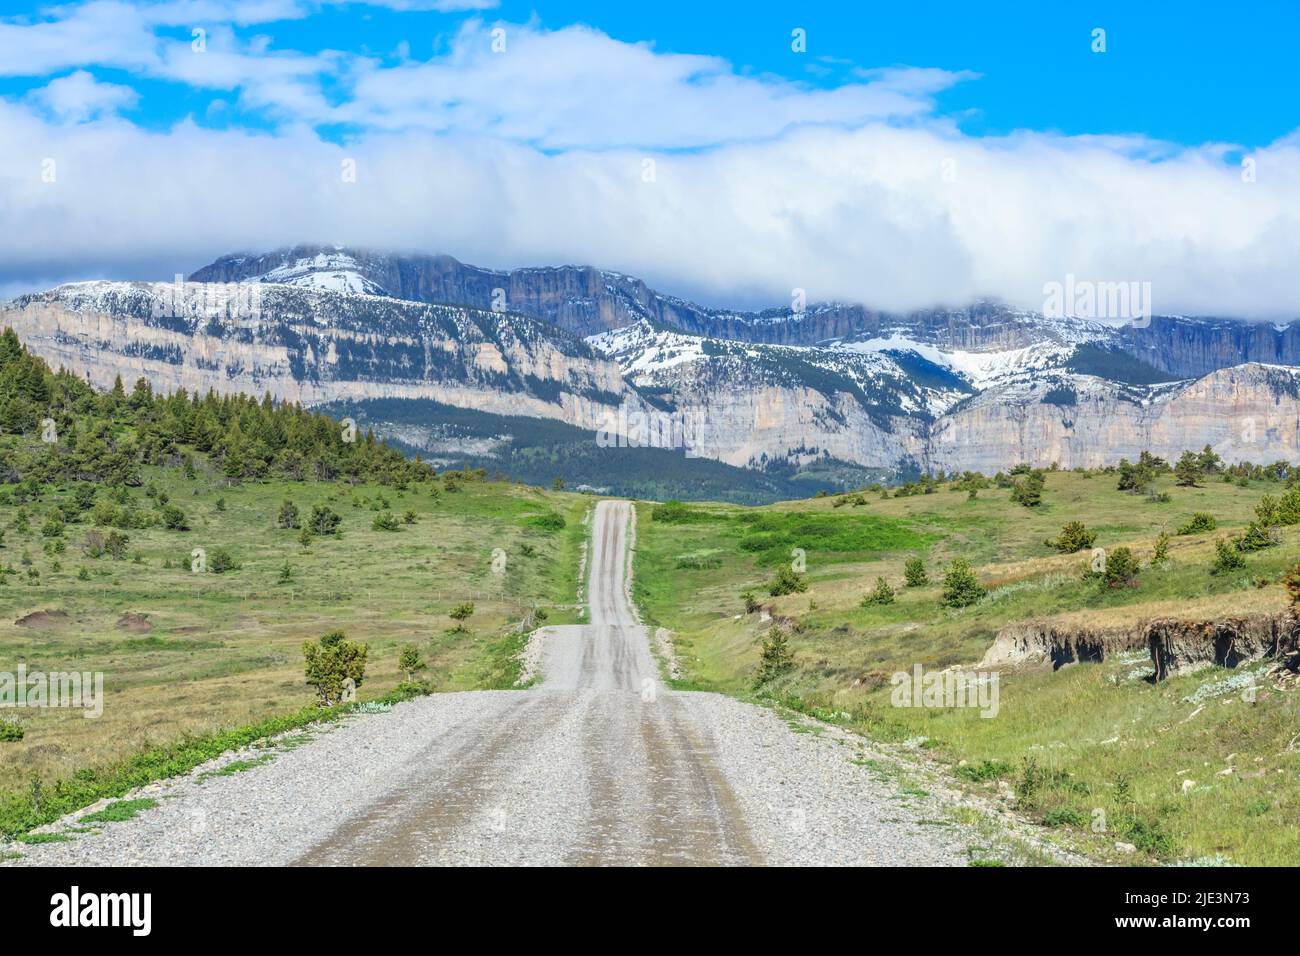 road leading to walling reef along the rocky mountain front near dupuyer, montana Stock Photo